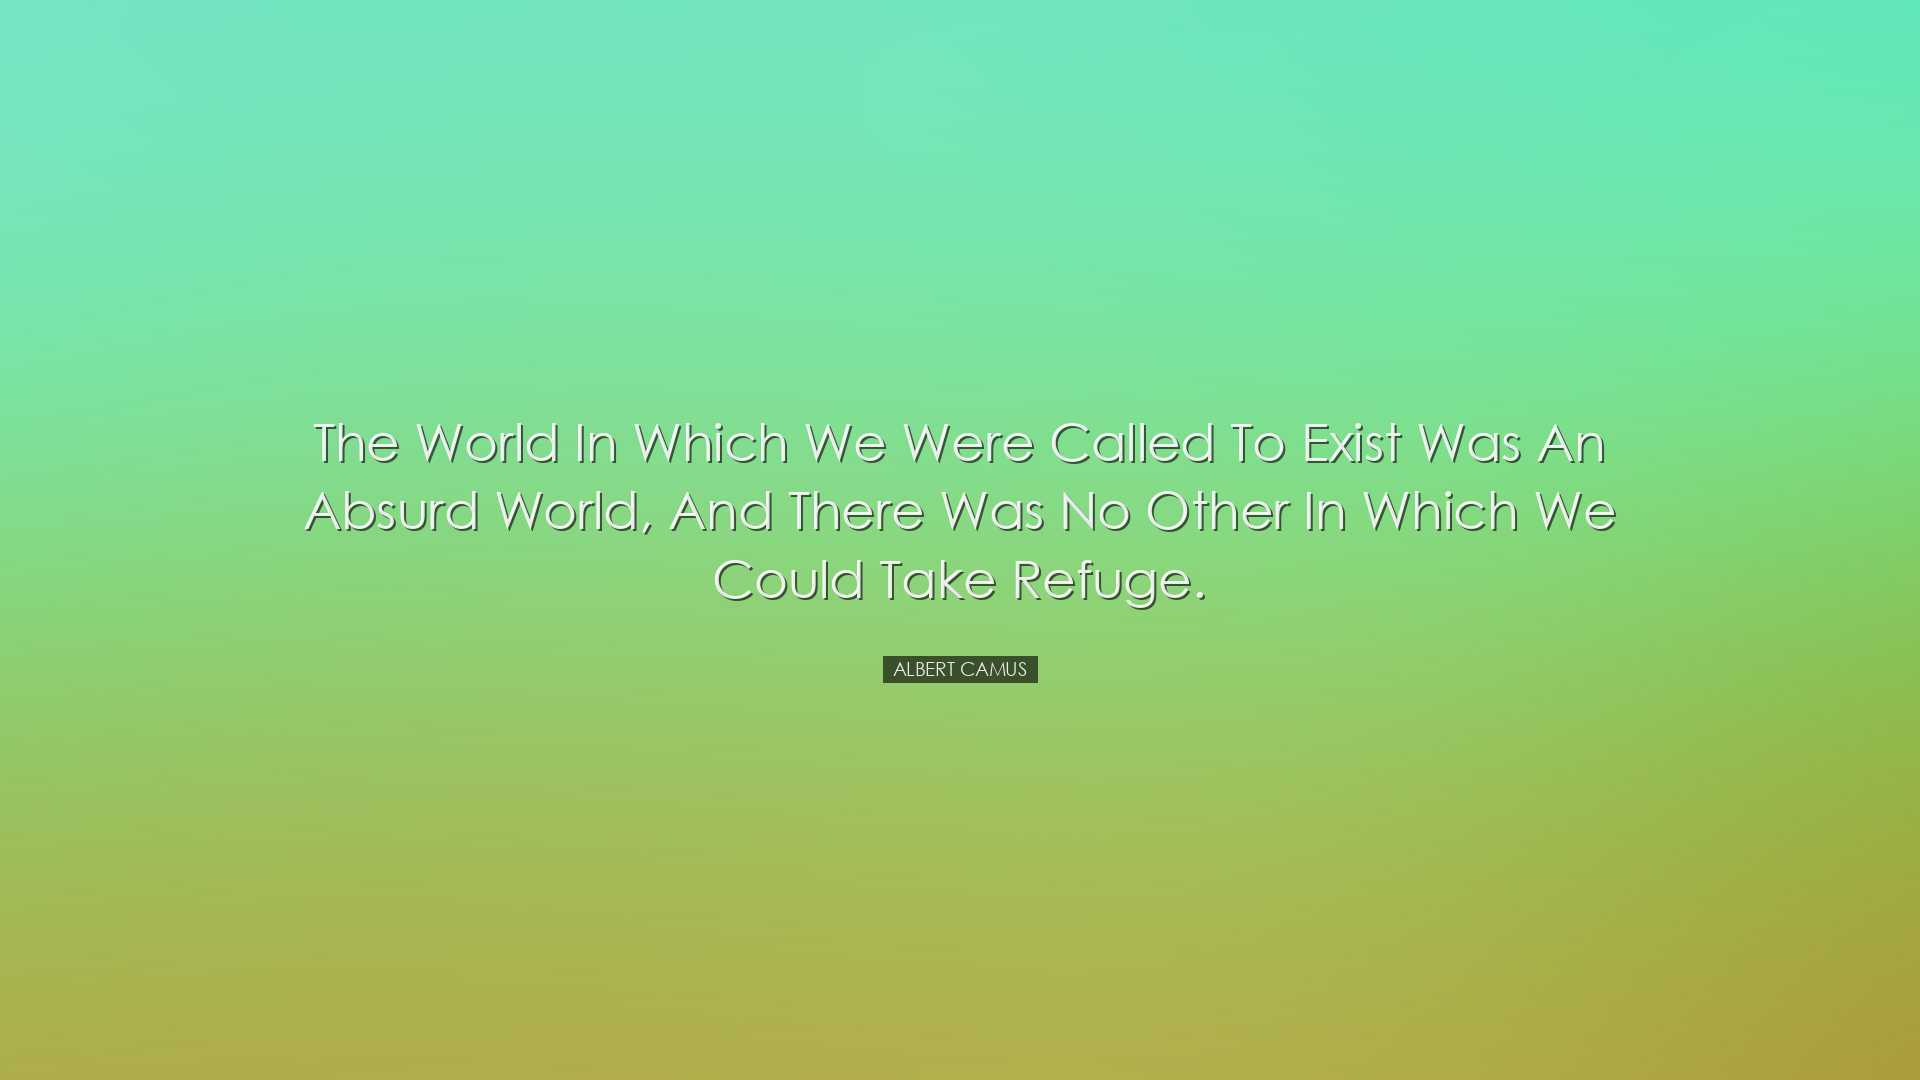 The world in which we were called to exist was an absurd world, an